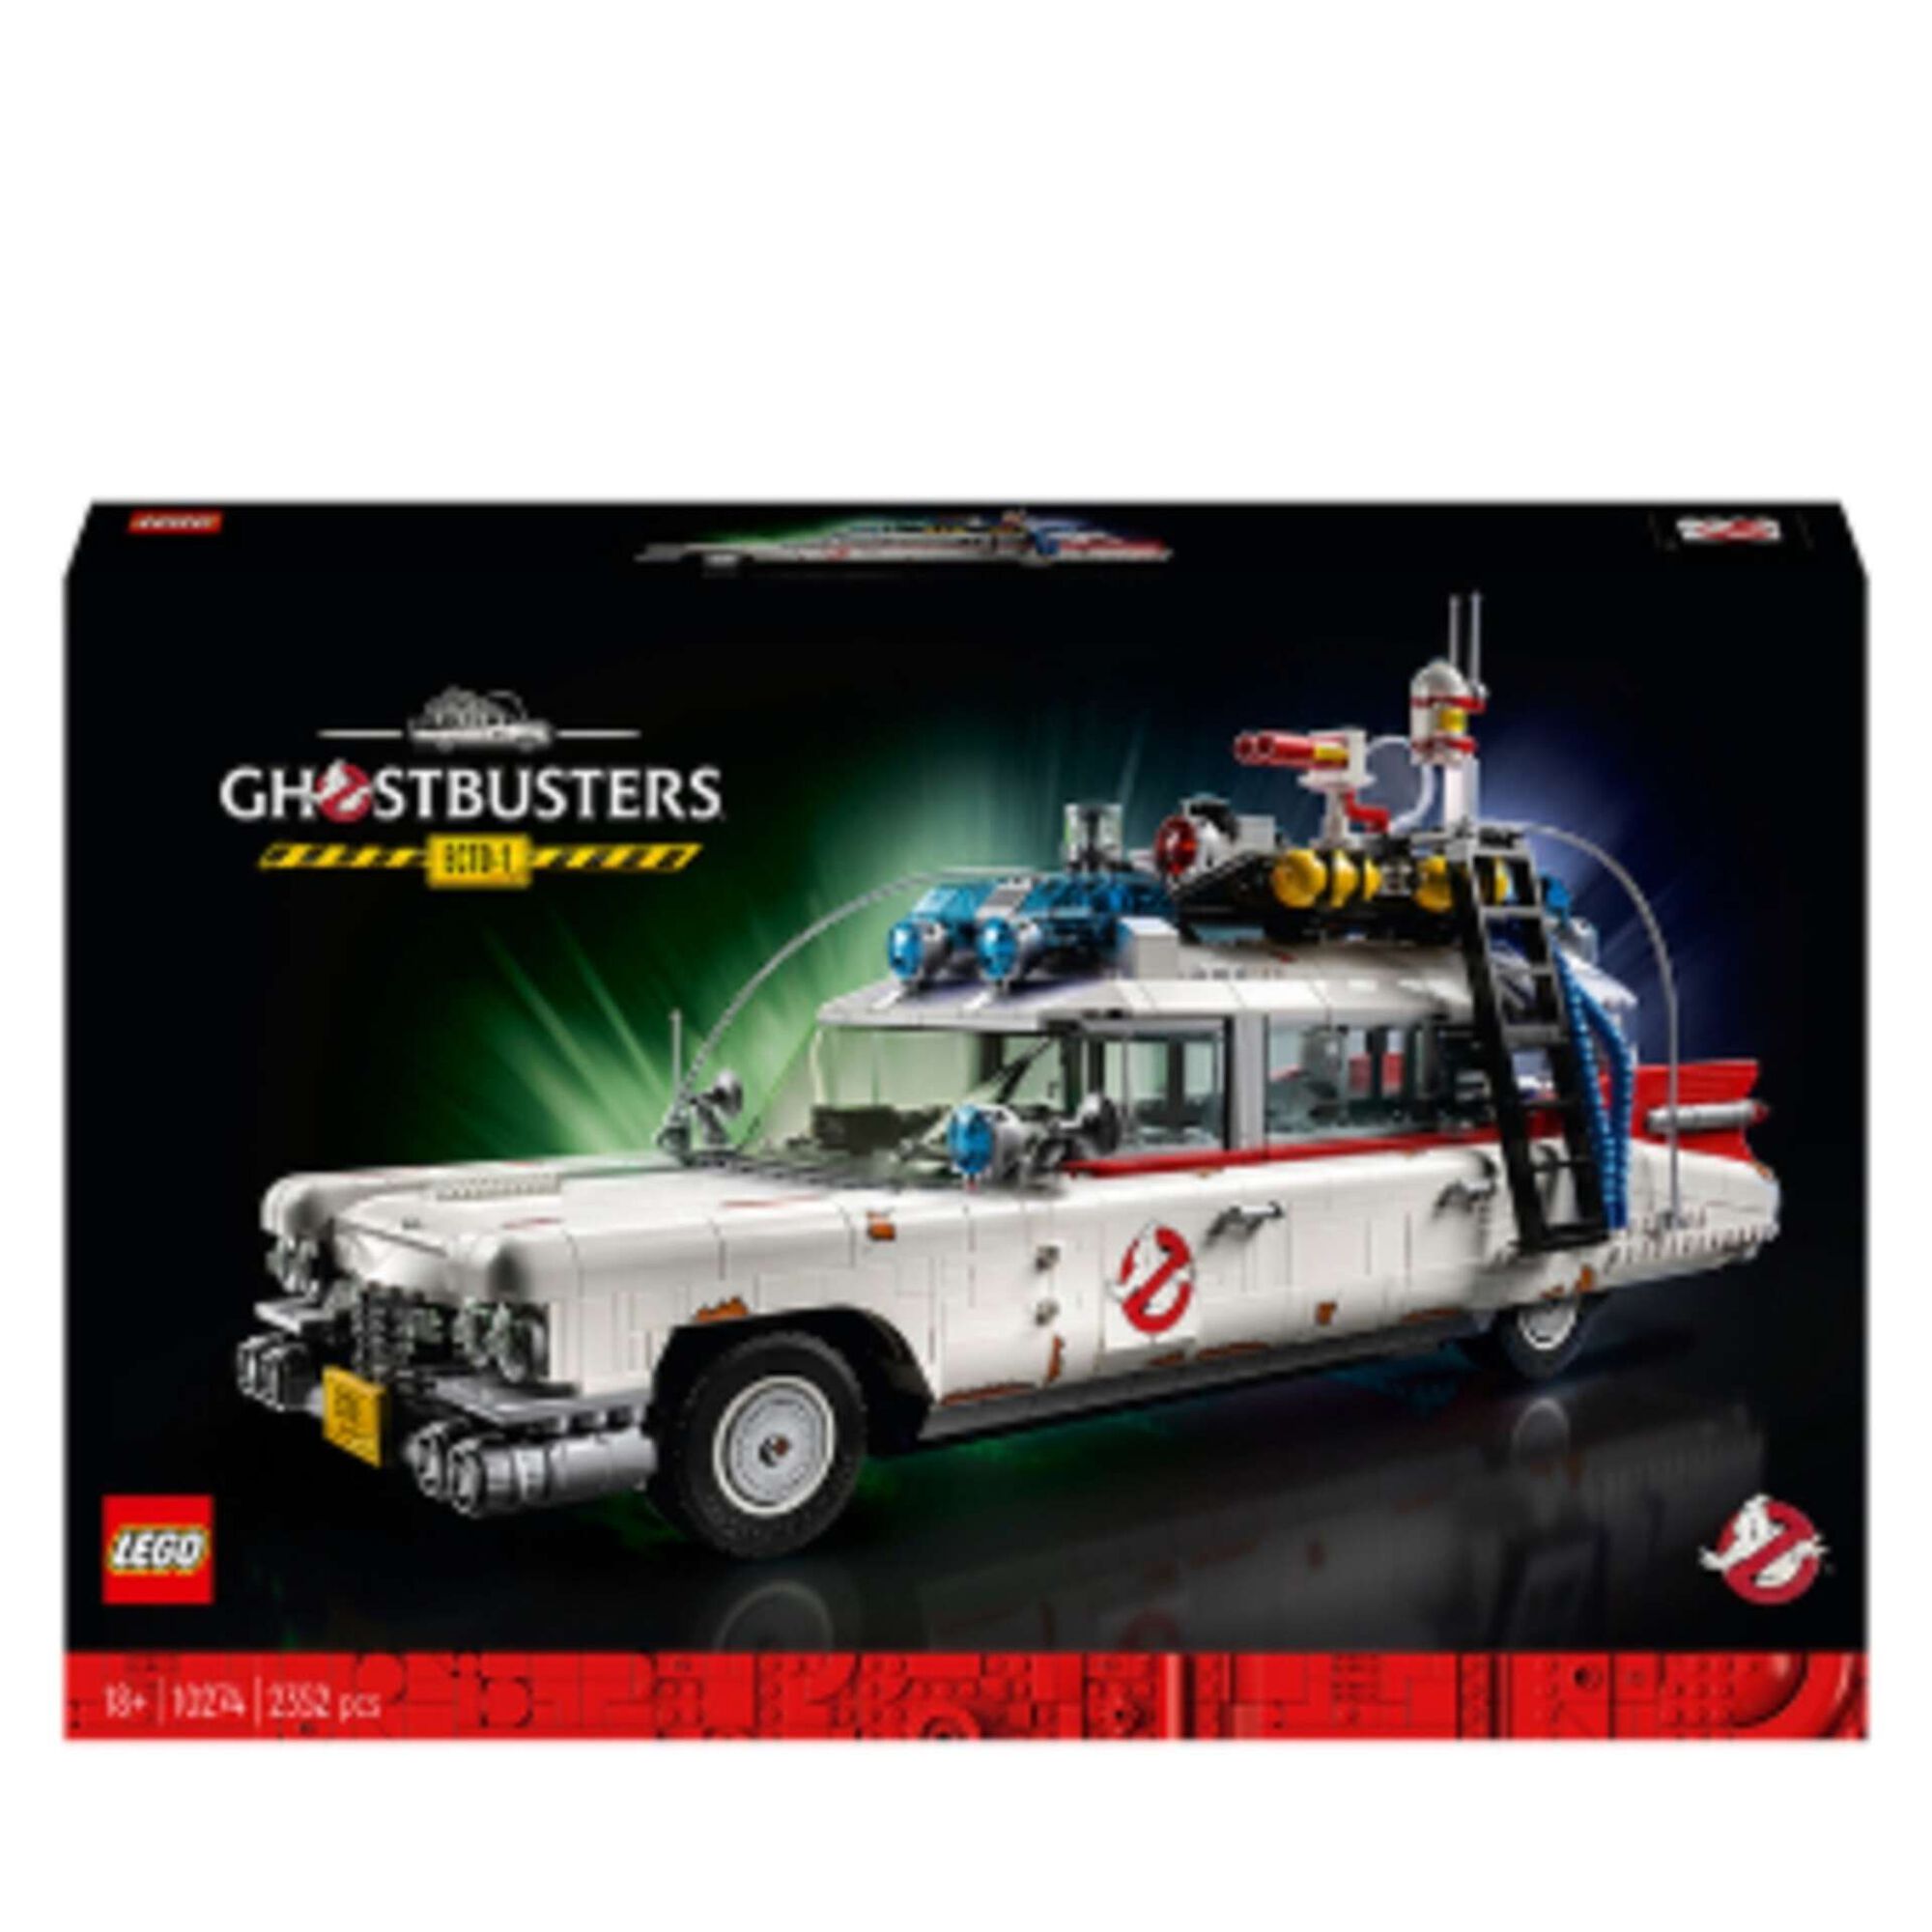 Ghostbusters ECTO-1 - 10274